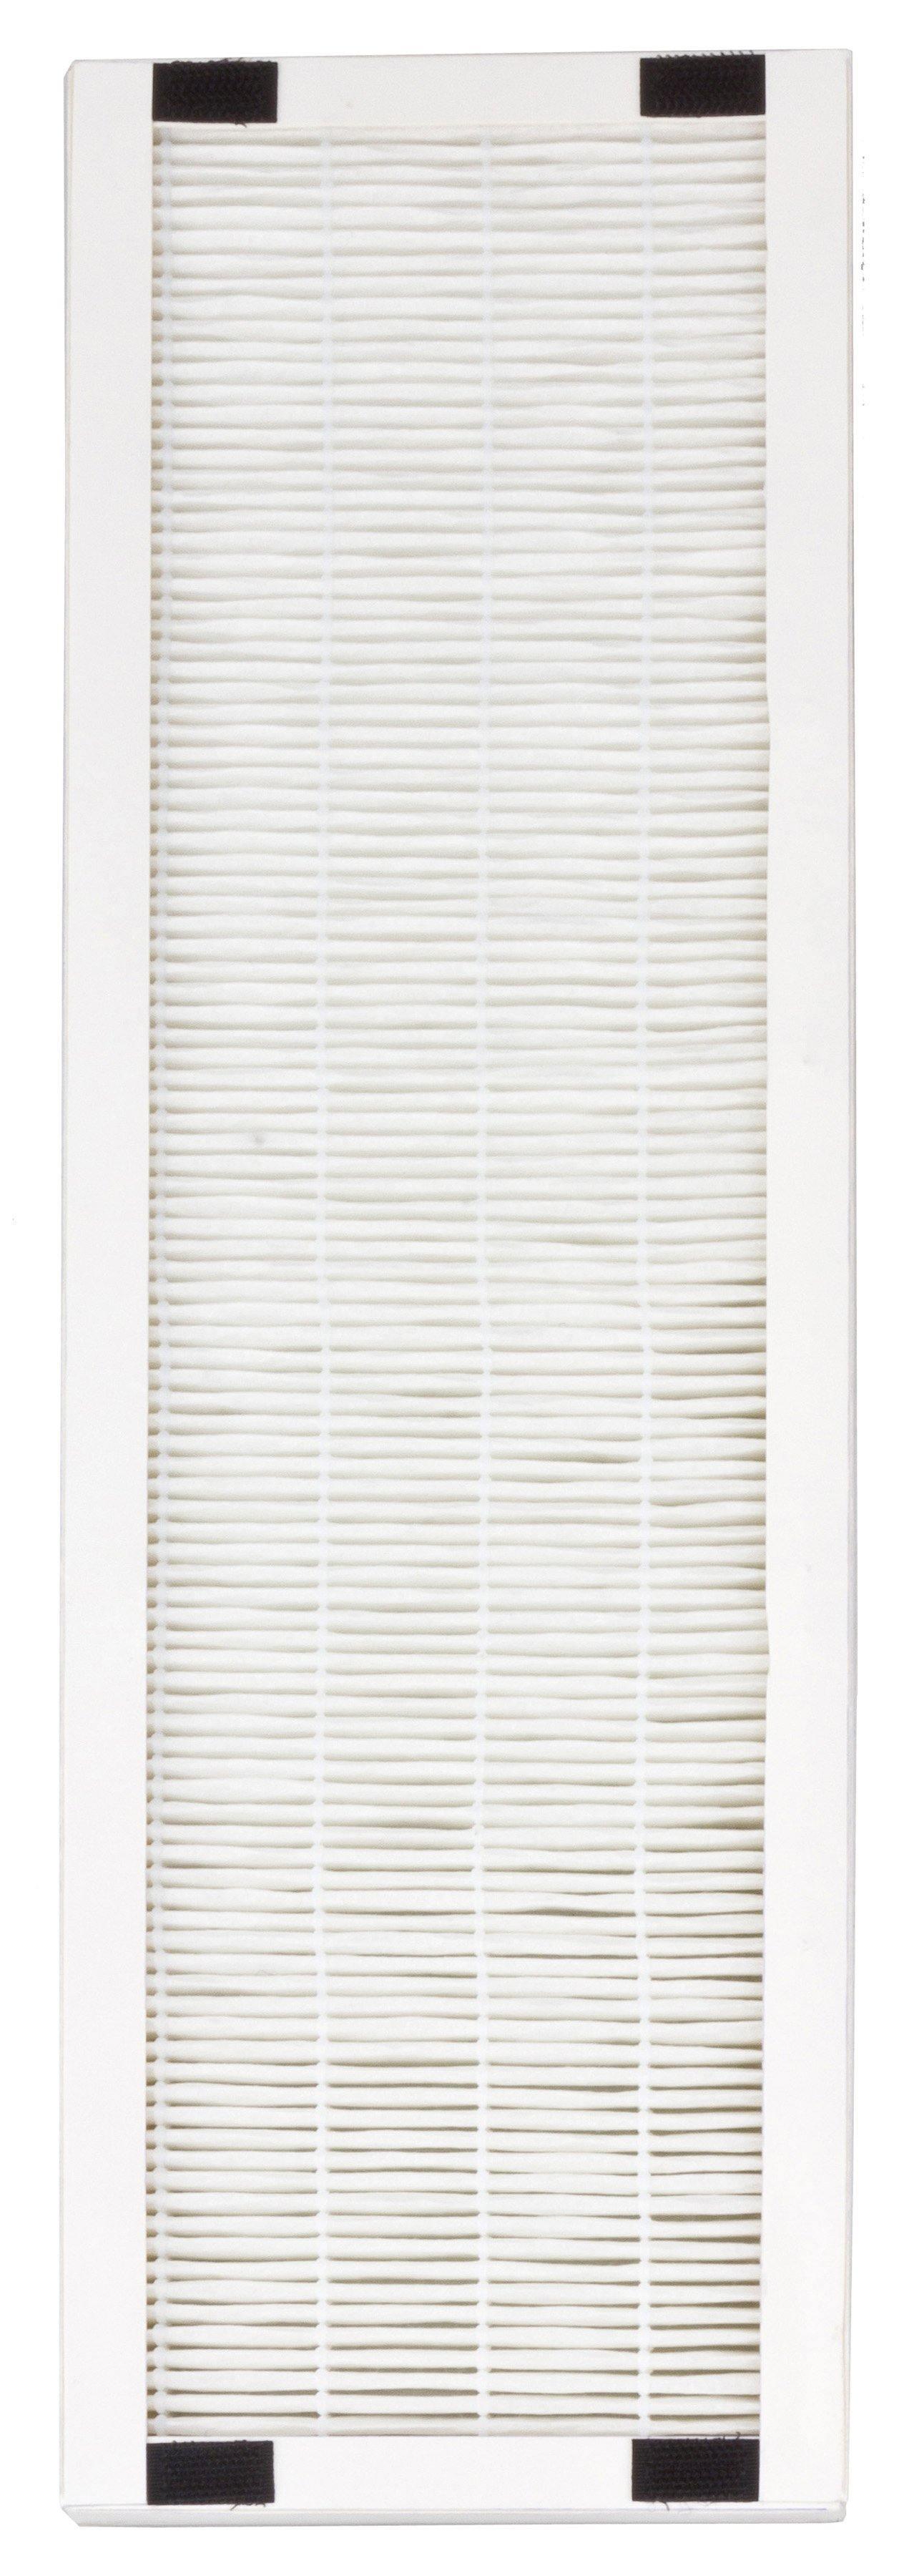 SPT AC-2062/AC-2062G Replacement HEPA Filter (Pack of 2) - Elite Air Purifiers